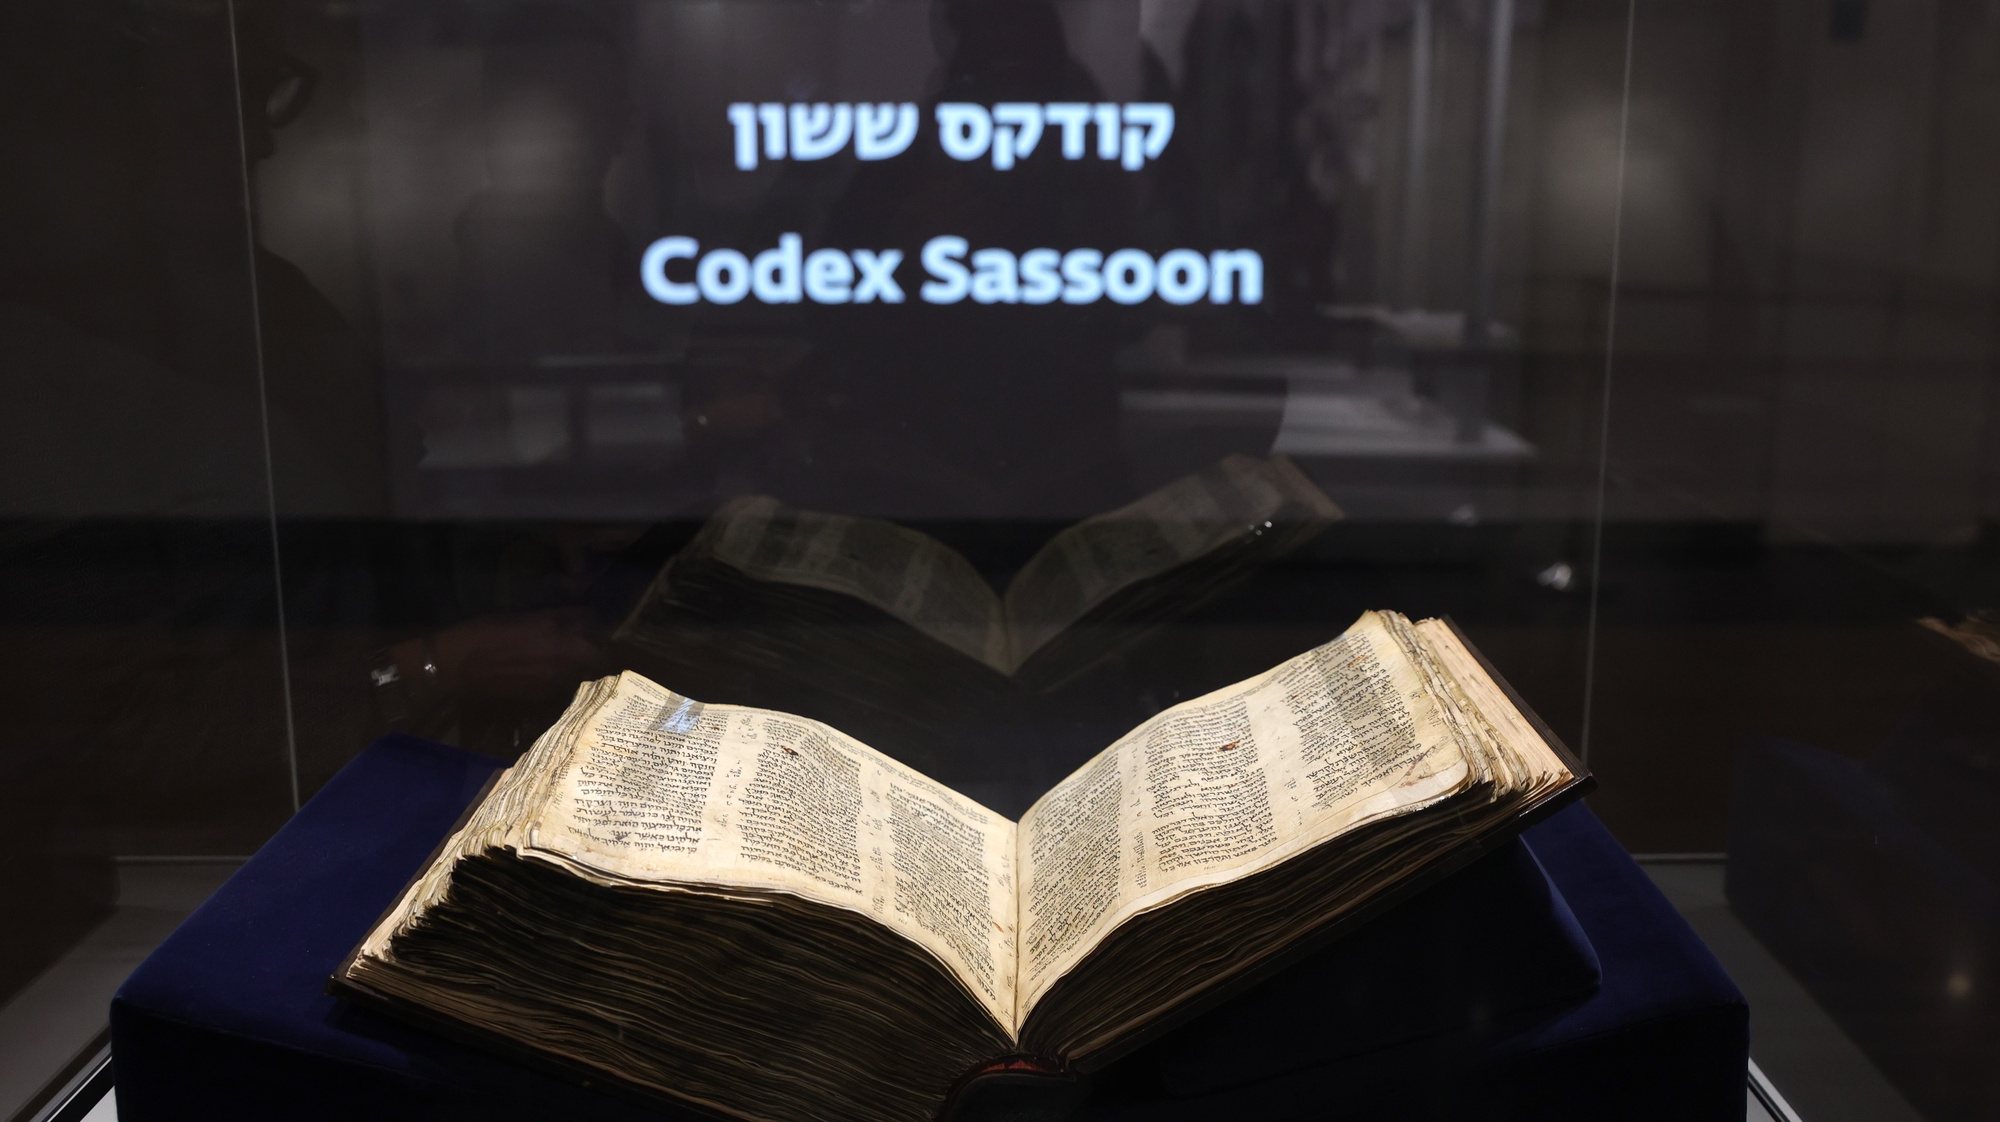 epa10537004 The Codex Sassoon, the oldest complete Hebrew Bible is on display at the ANU Museum of the Jewish People in Tel Aviv, Israel, 22 March 2023. Dating from the early 10th century, the Codex Sassoon bible will be on public display from 23 to 29 March in Tel Aviv. After that the book will be auctioned by Sotheby’s in New York, USA on 16 May, with an estimated price of 30 to 50 million dollars.  EPA/ABIR SULTAN